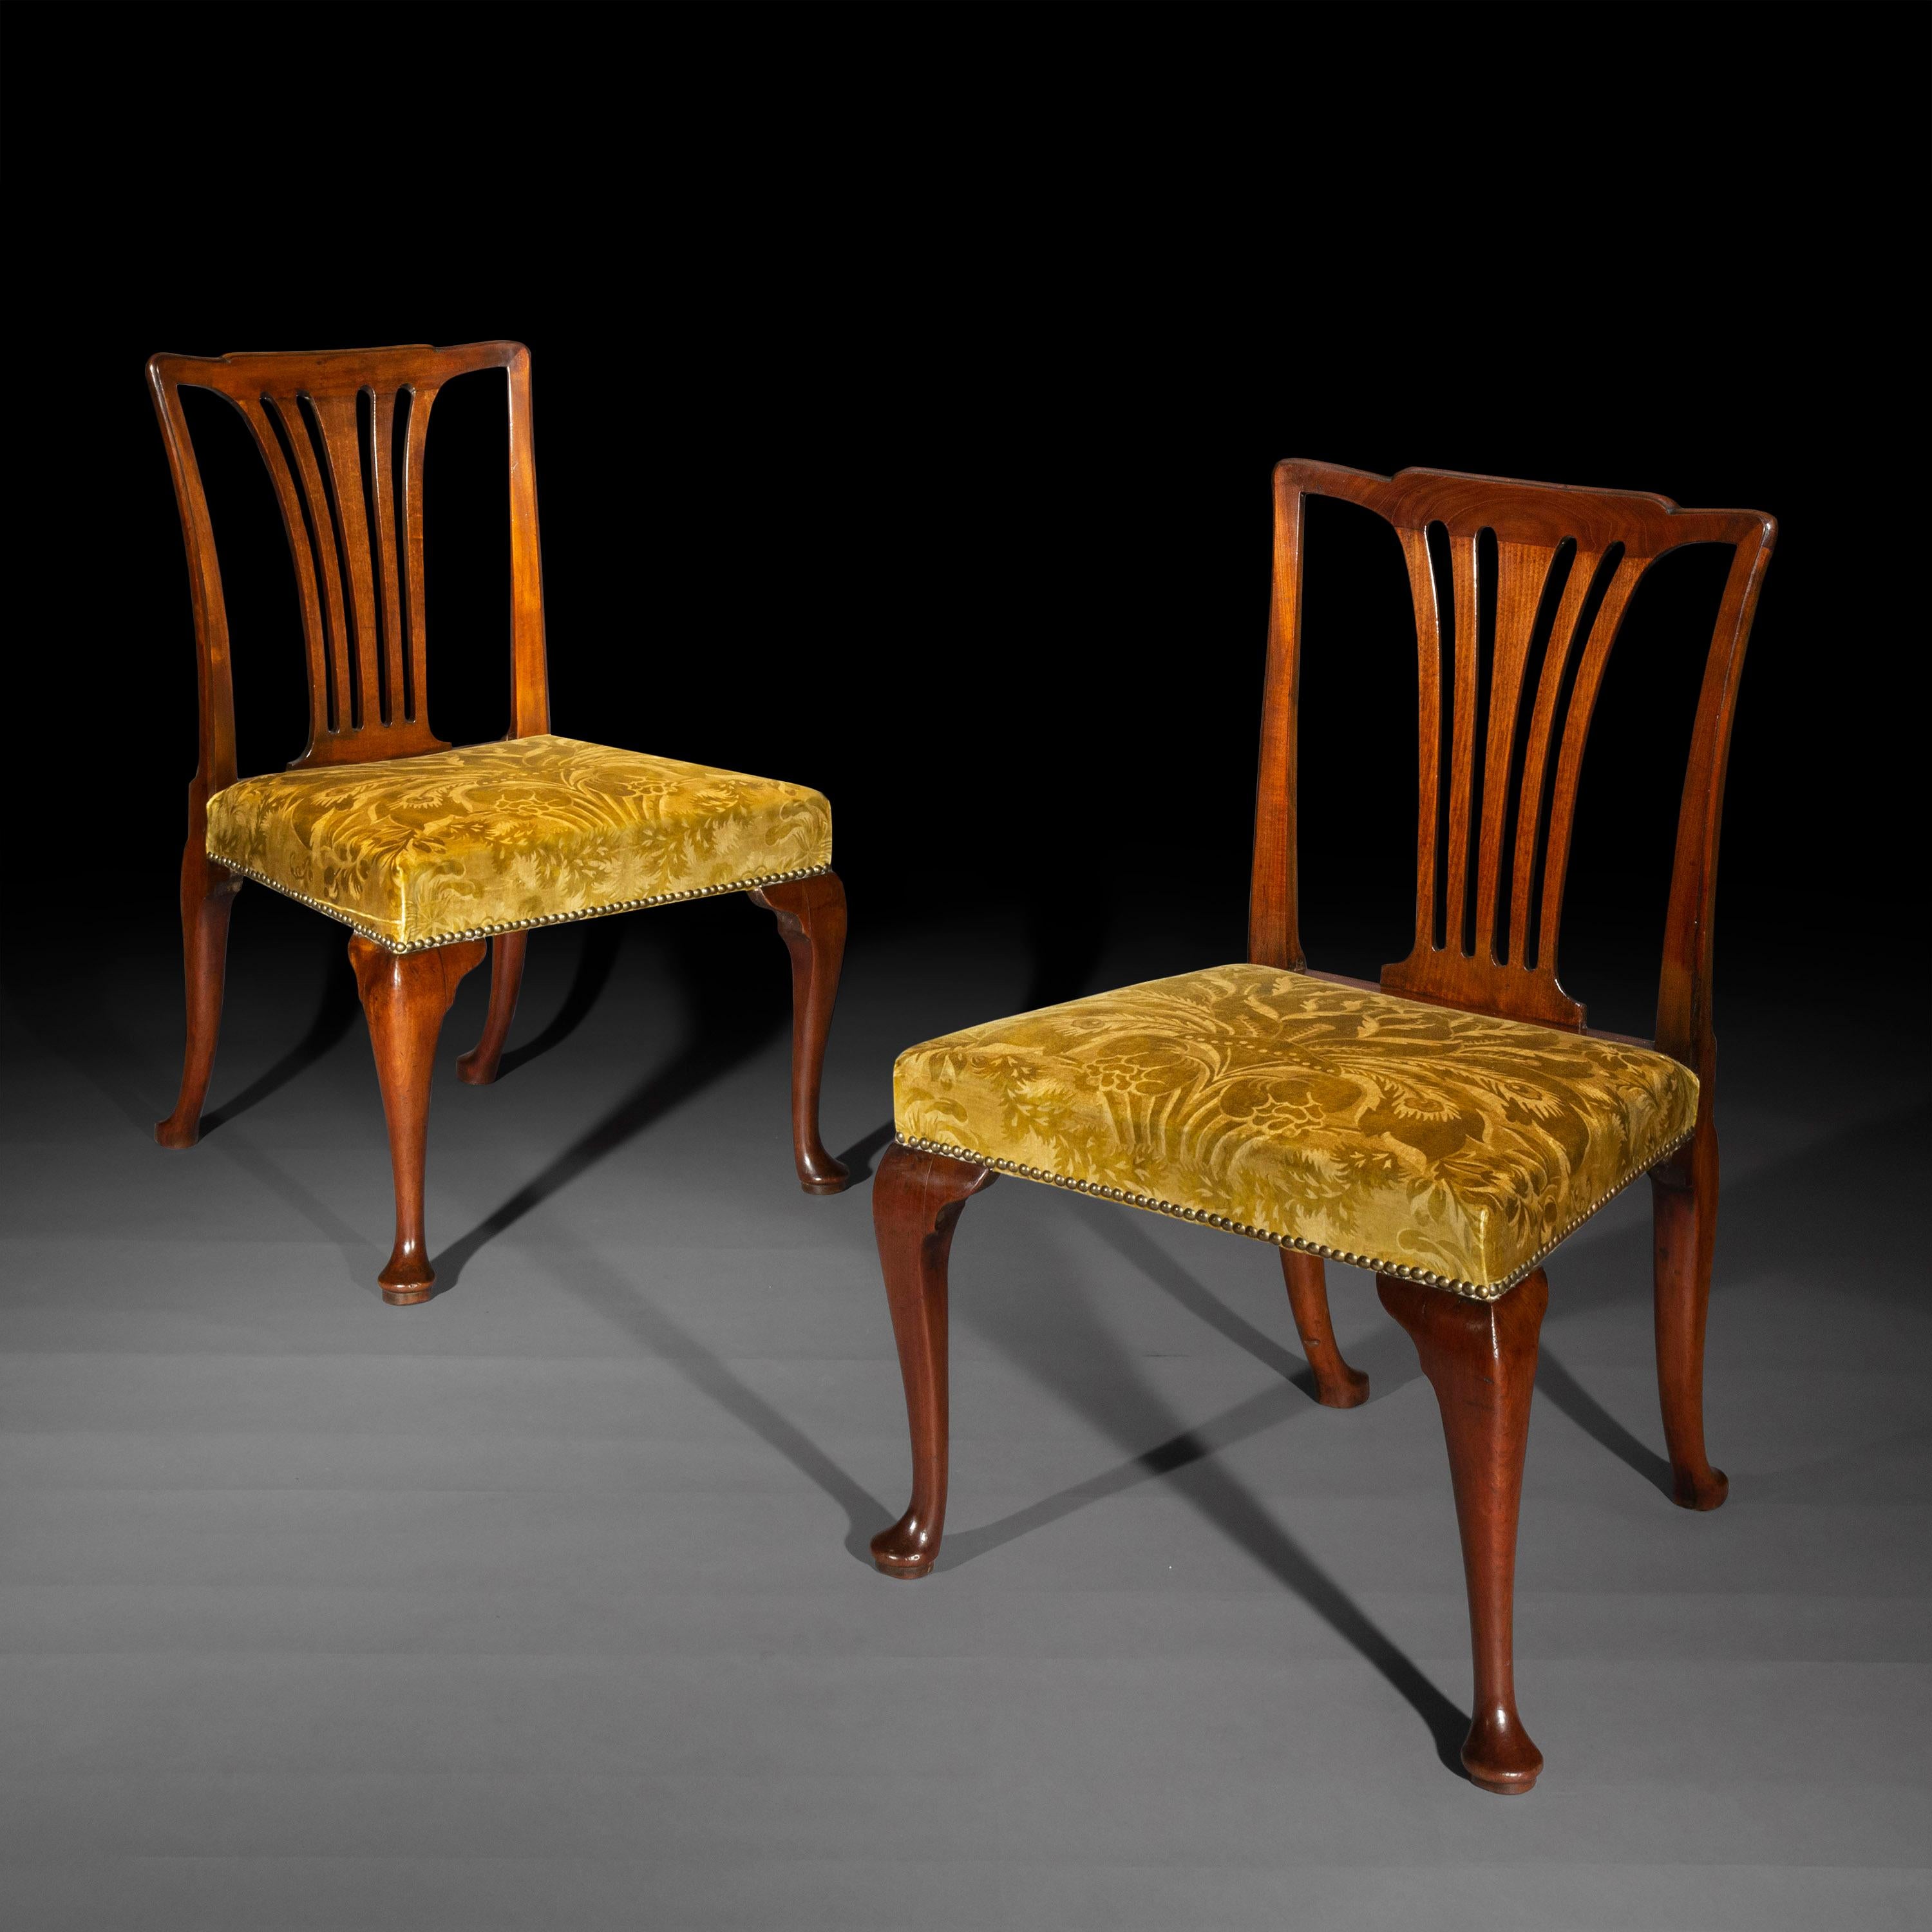 An unusual pair of early 18th century side chairs chairs, attributed to Giles Grendey.
England, circa 1735.

Why we like them 
An incredibly rare and good looking model. No decoration interferes with its sleek, Minimalist design; the almost